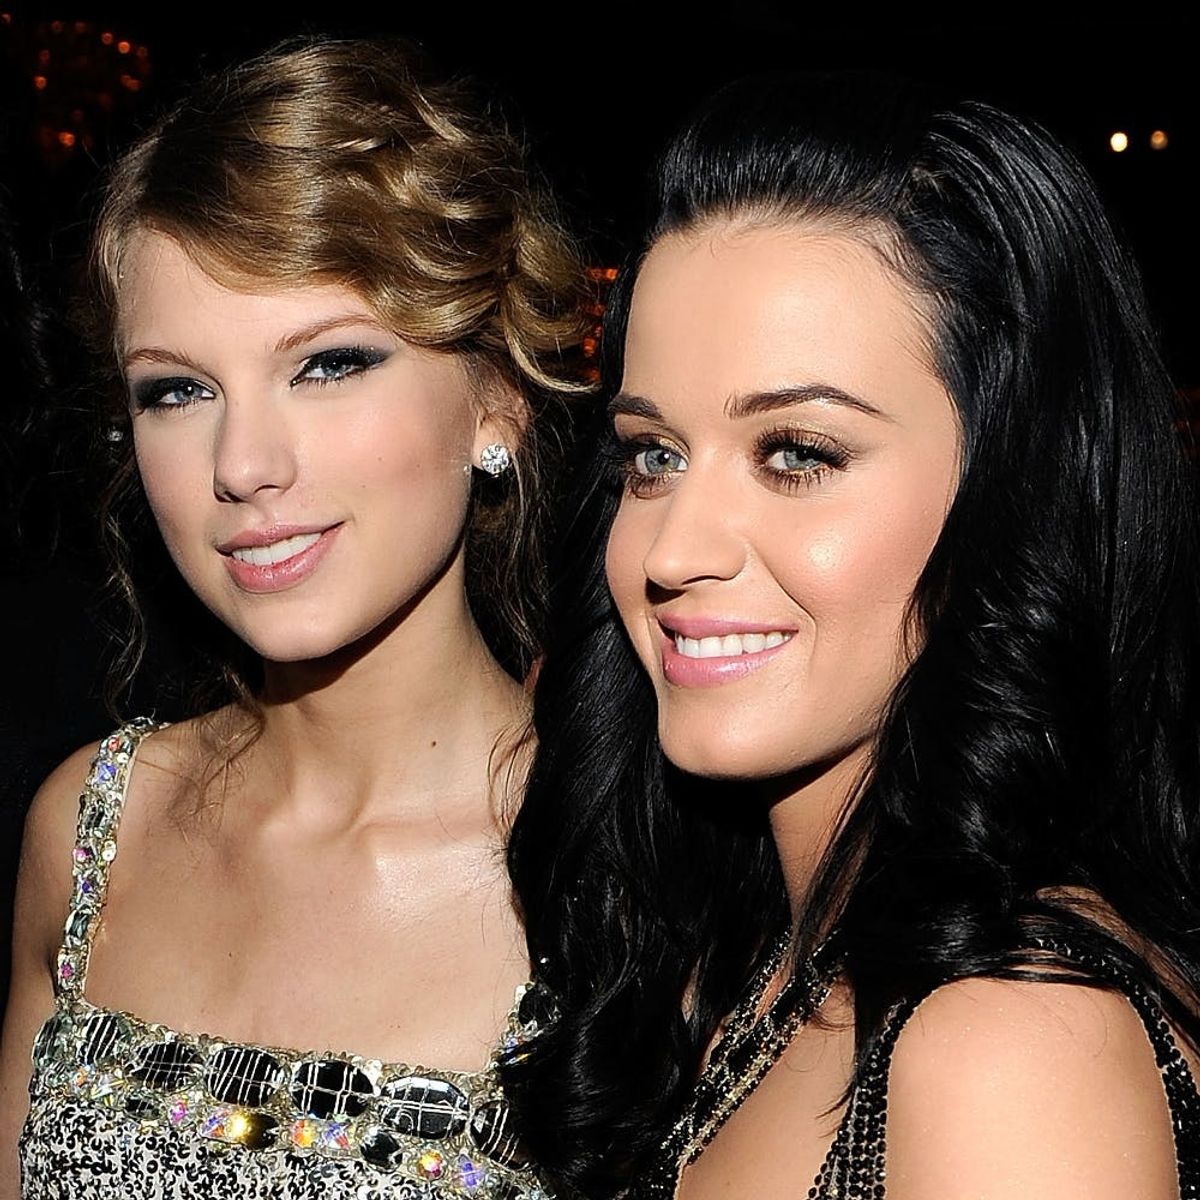 Katy Perry Is Making Music With (Her Enemy) Taylor Swift’s Producers